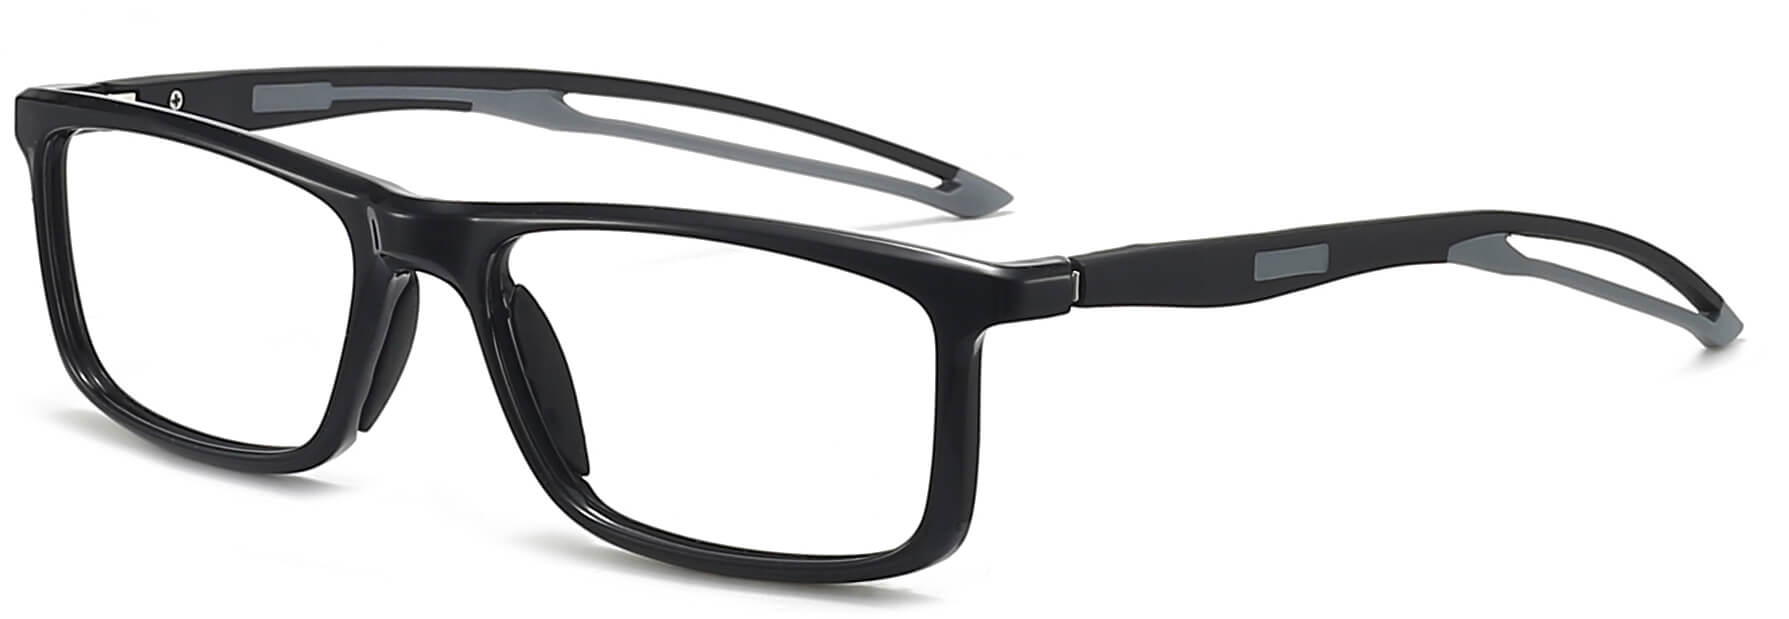 Jagger Rectangle Black Eyeglasses from ANRRI, angle view